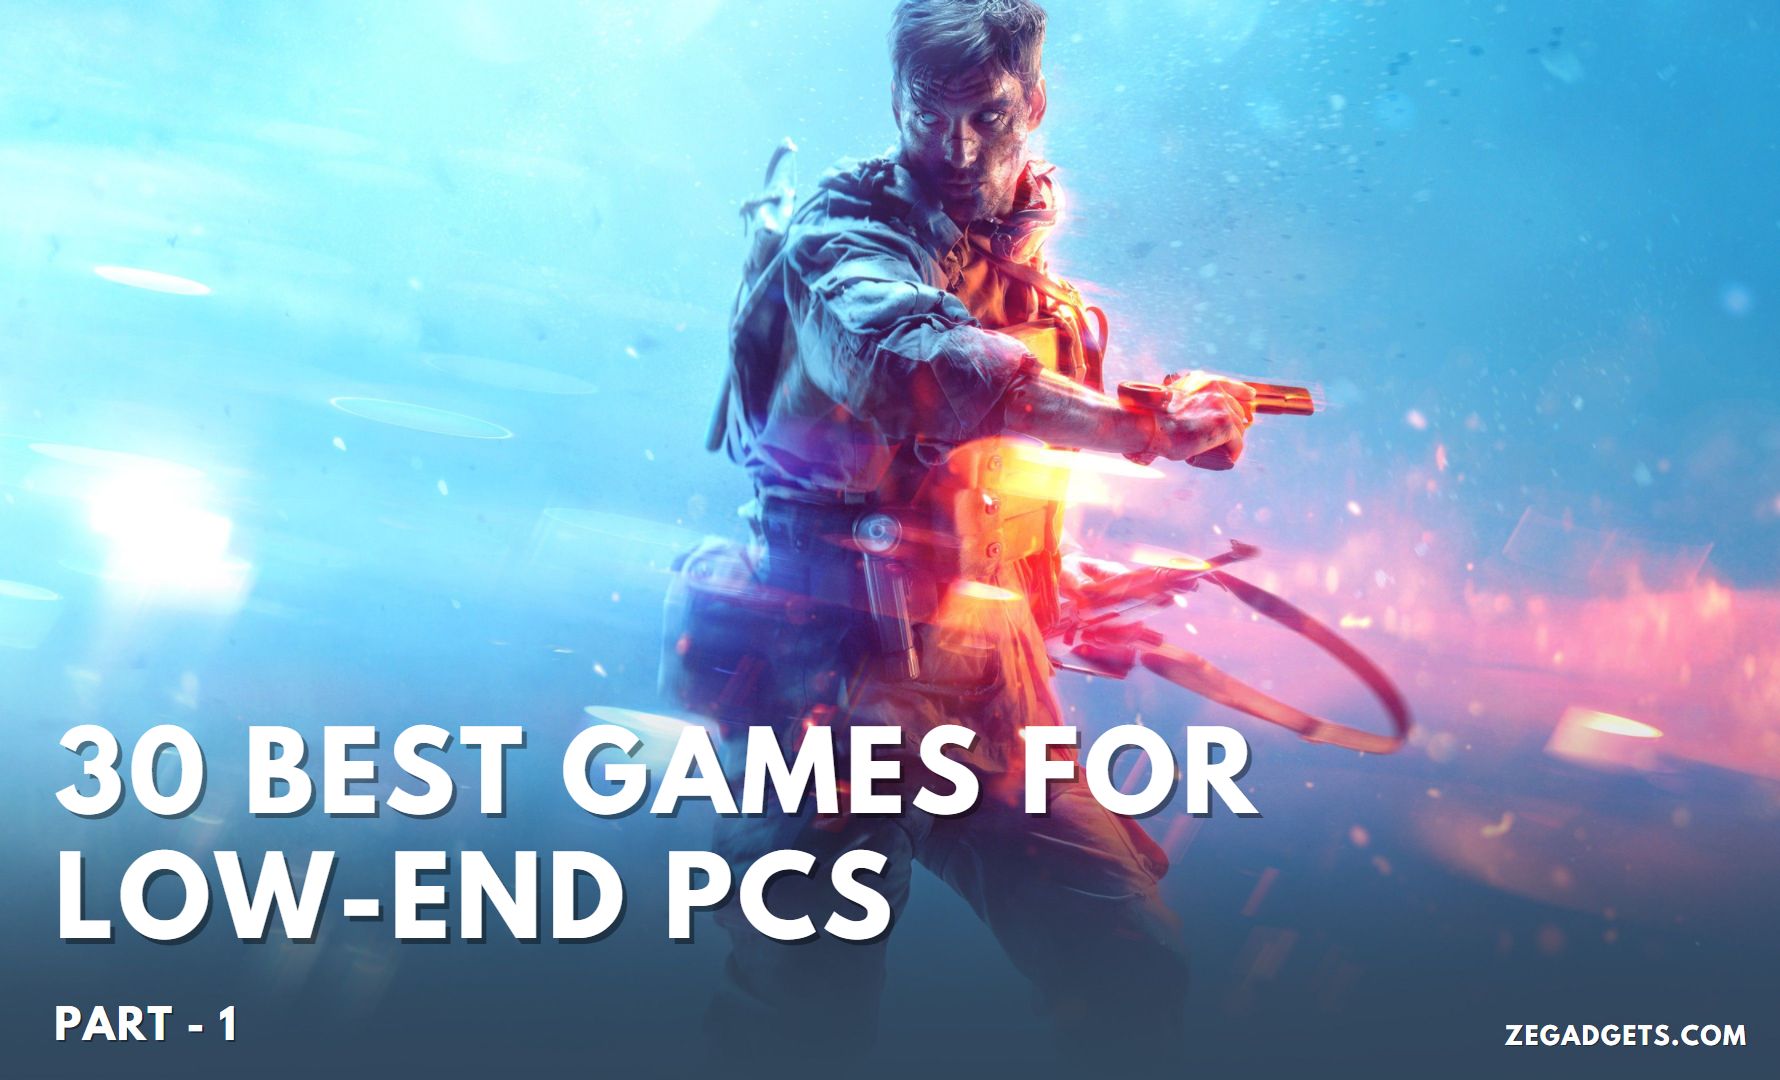 Free game on Steam For Low End PCs Part 3. #gamesforlowendpc